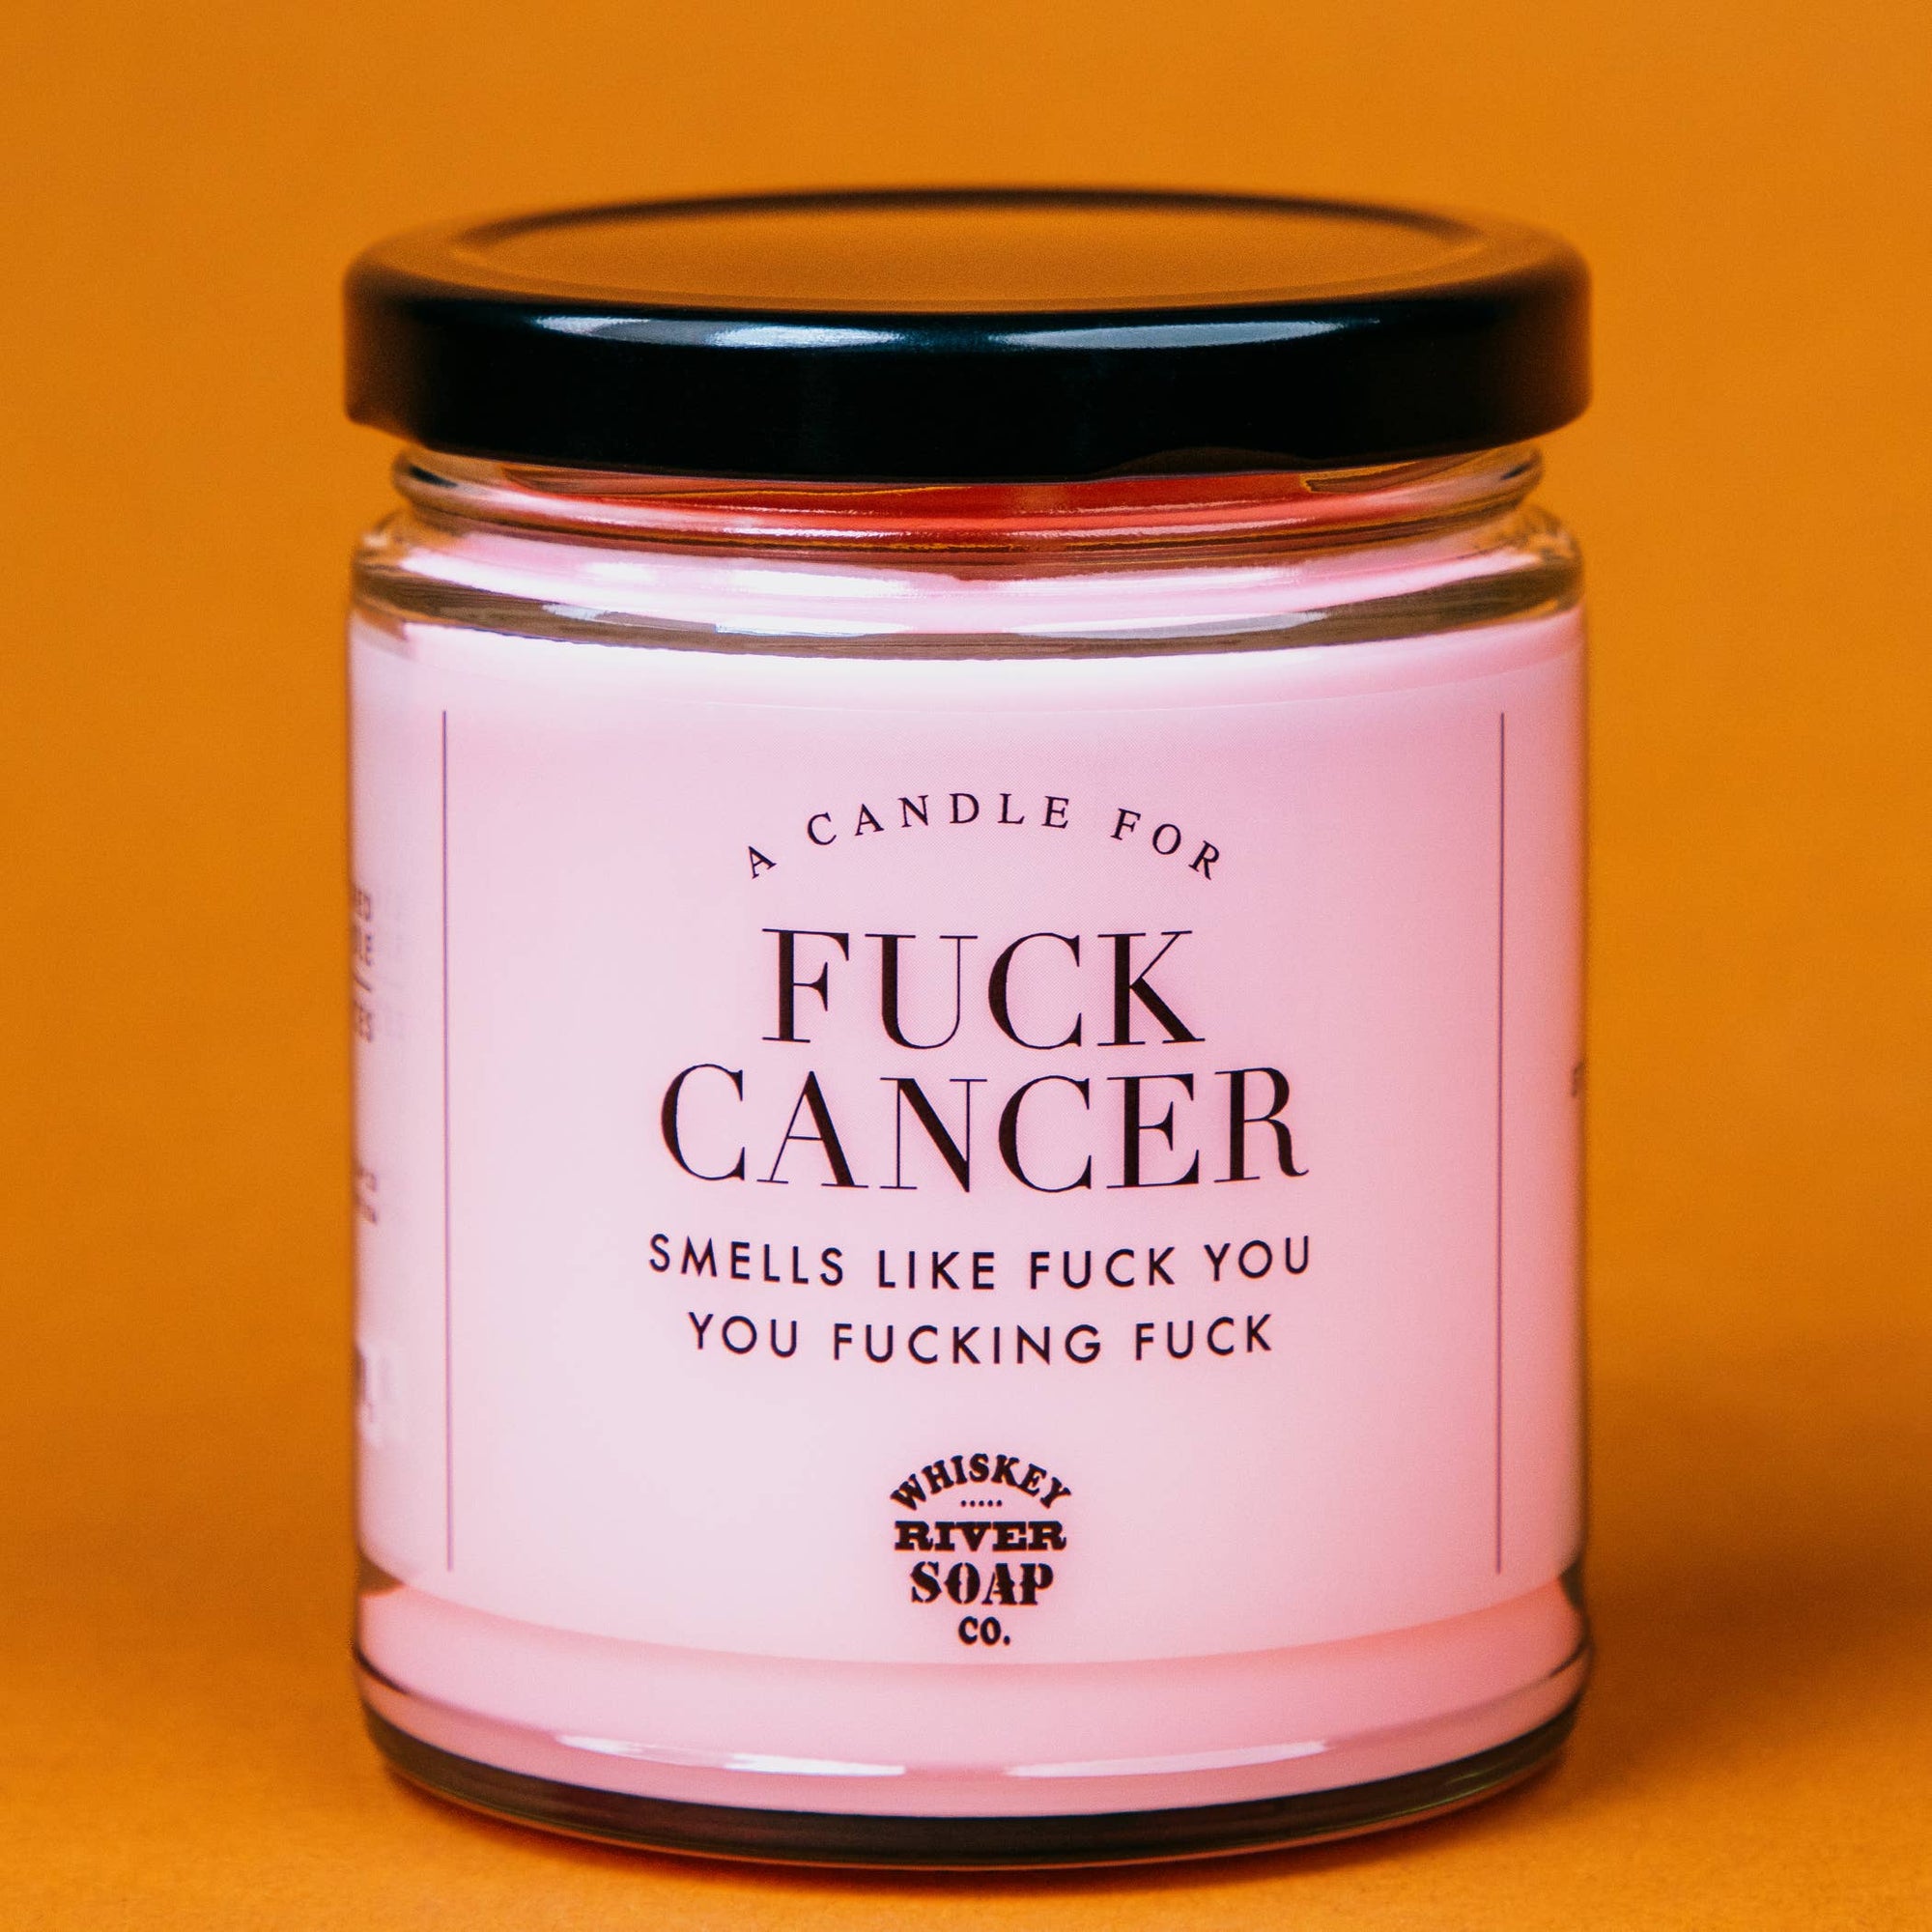 A Candle for Fuck Cancer | Funny Candles